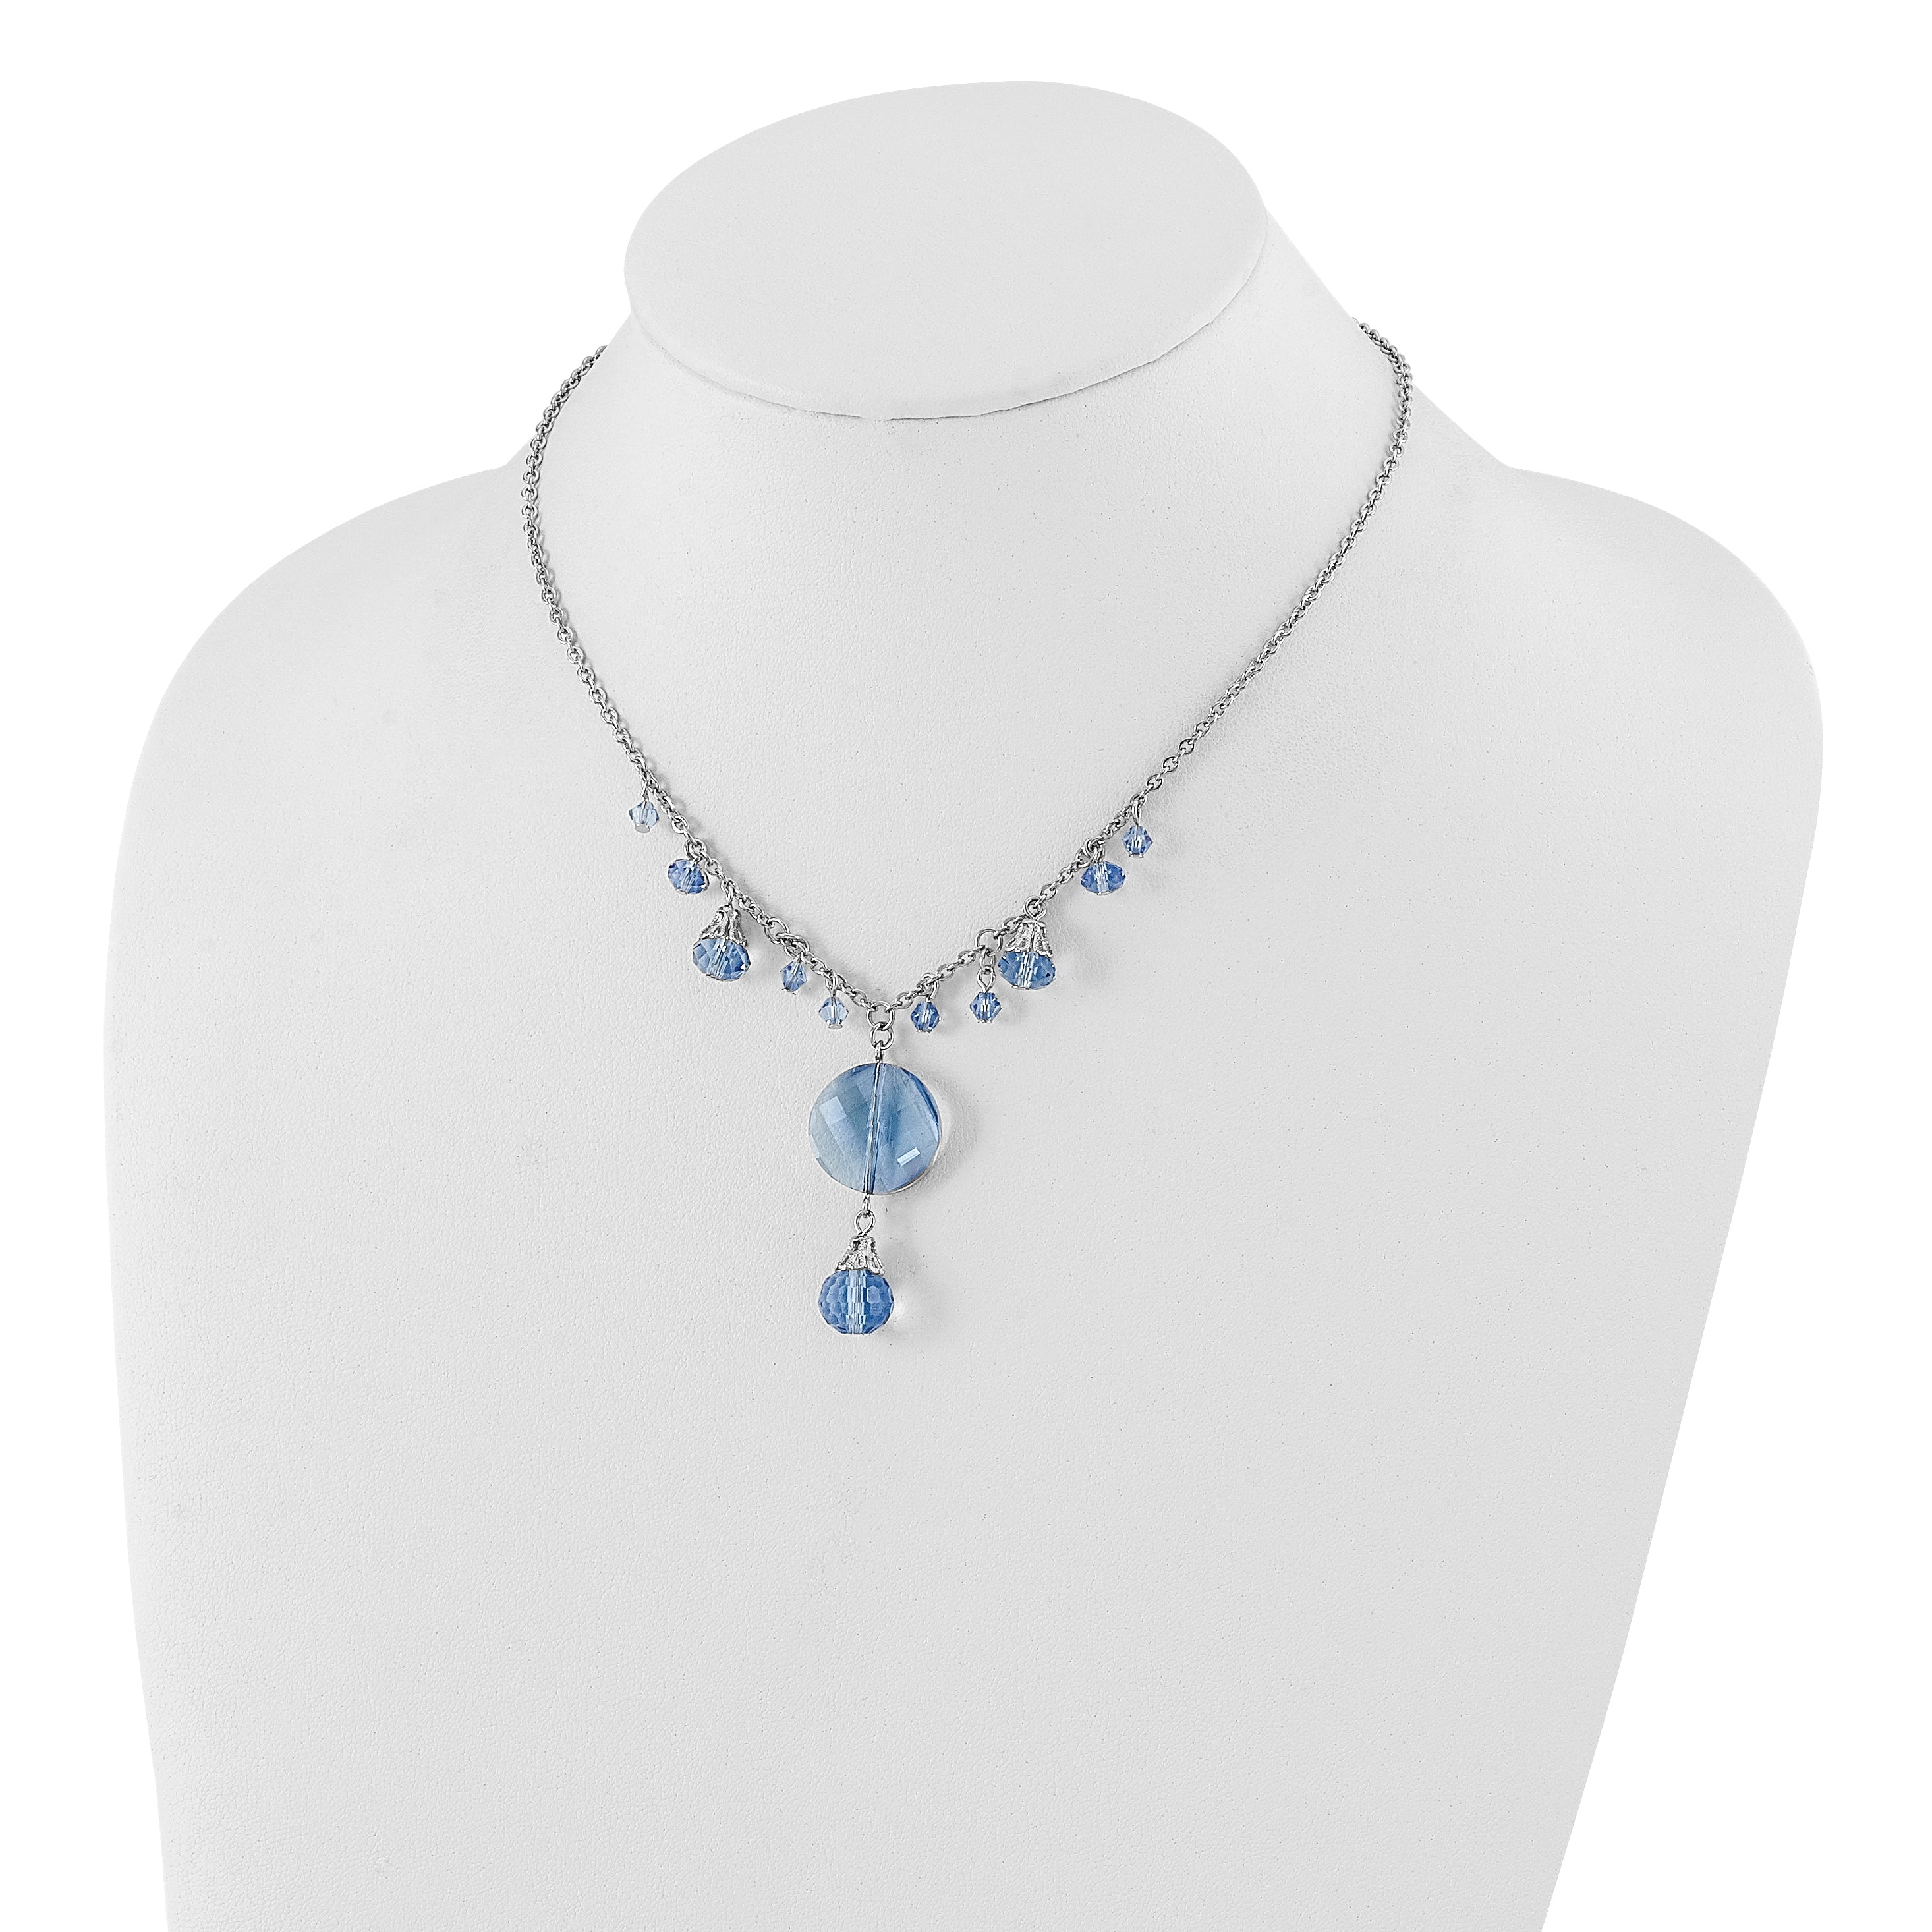 1928 Jewelry Silver-tone Light Blue Faceted Glass Dangle Beads 16 inch Necklace with 3 inch extension